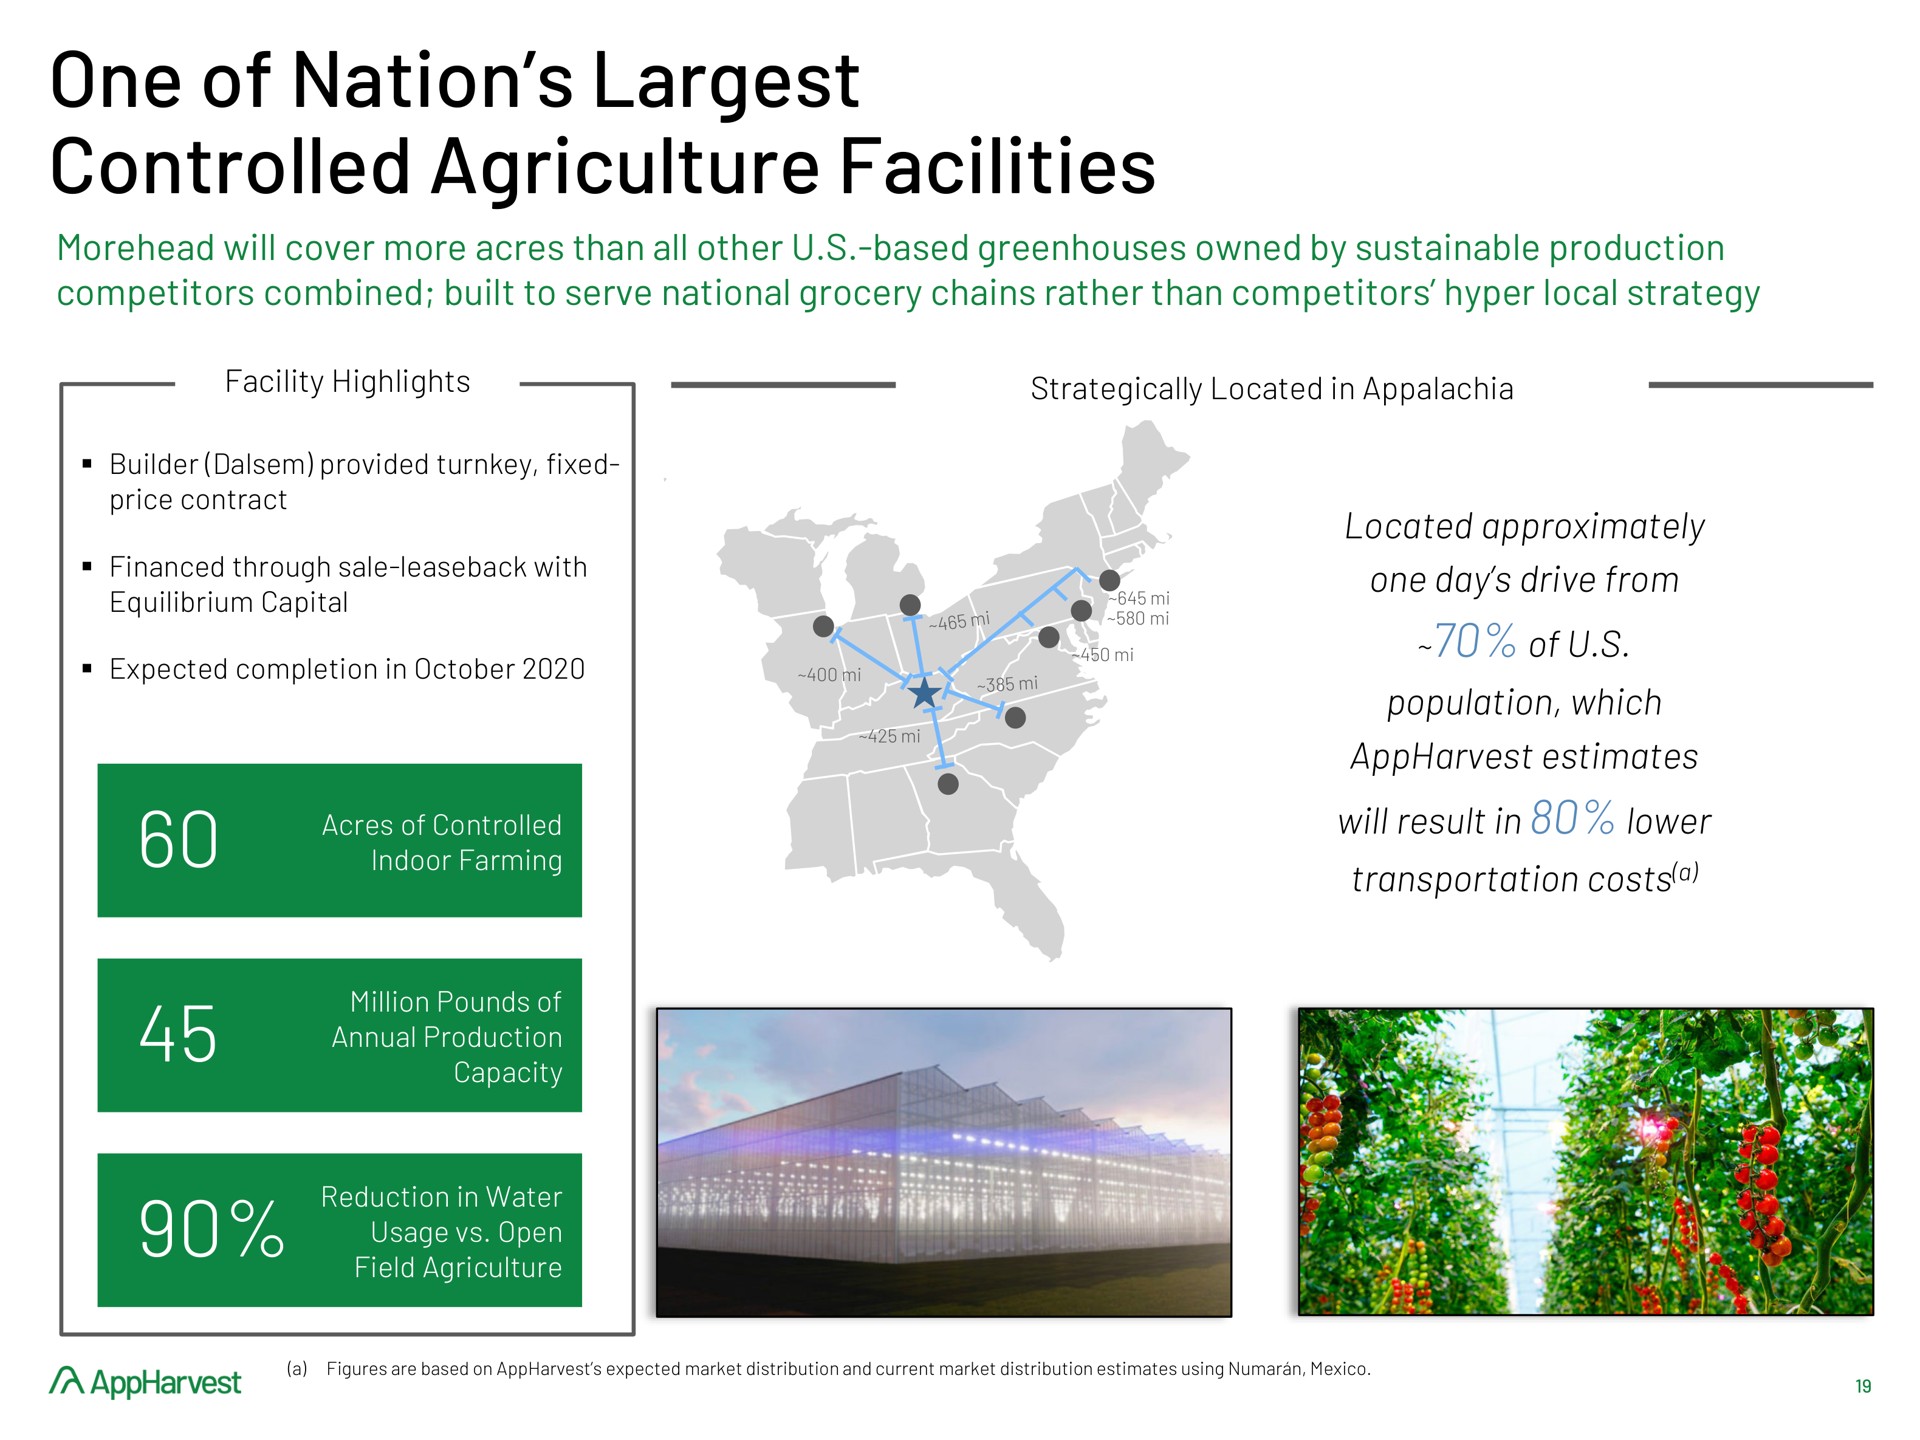 one of nation controlled agriculture facilities mos wire equilibrium capital hays transportation costs | AppHarvest